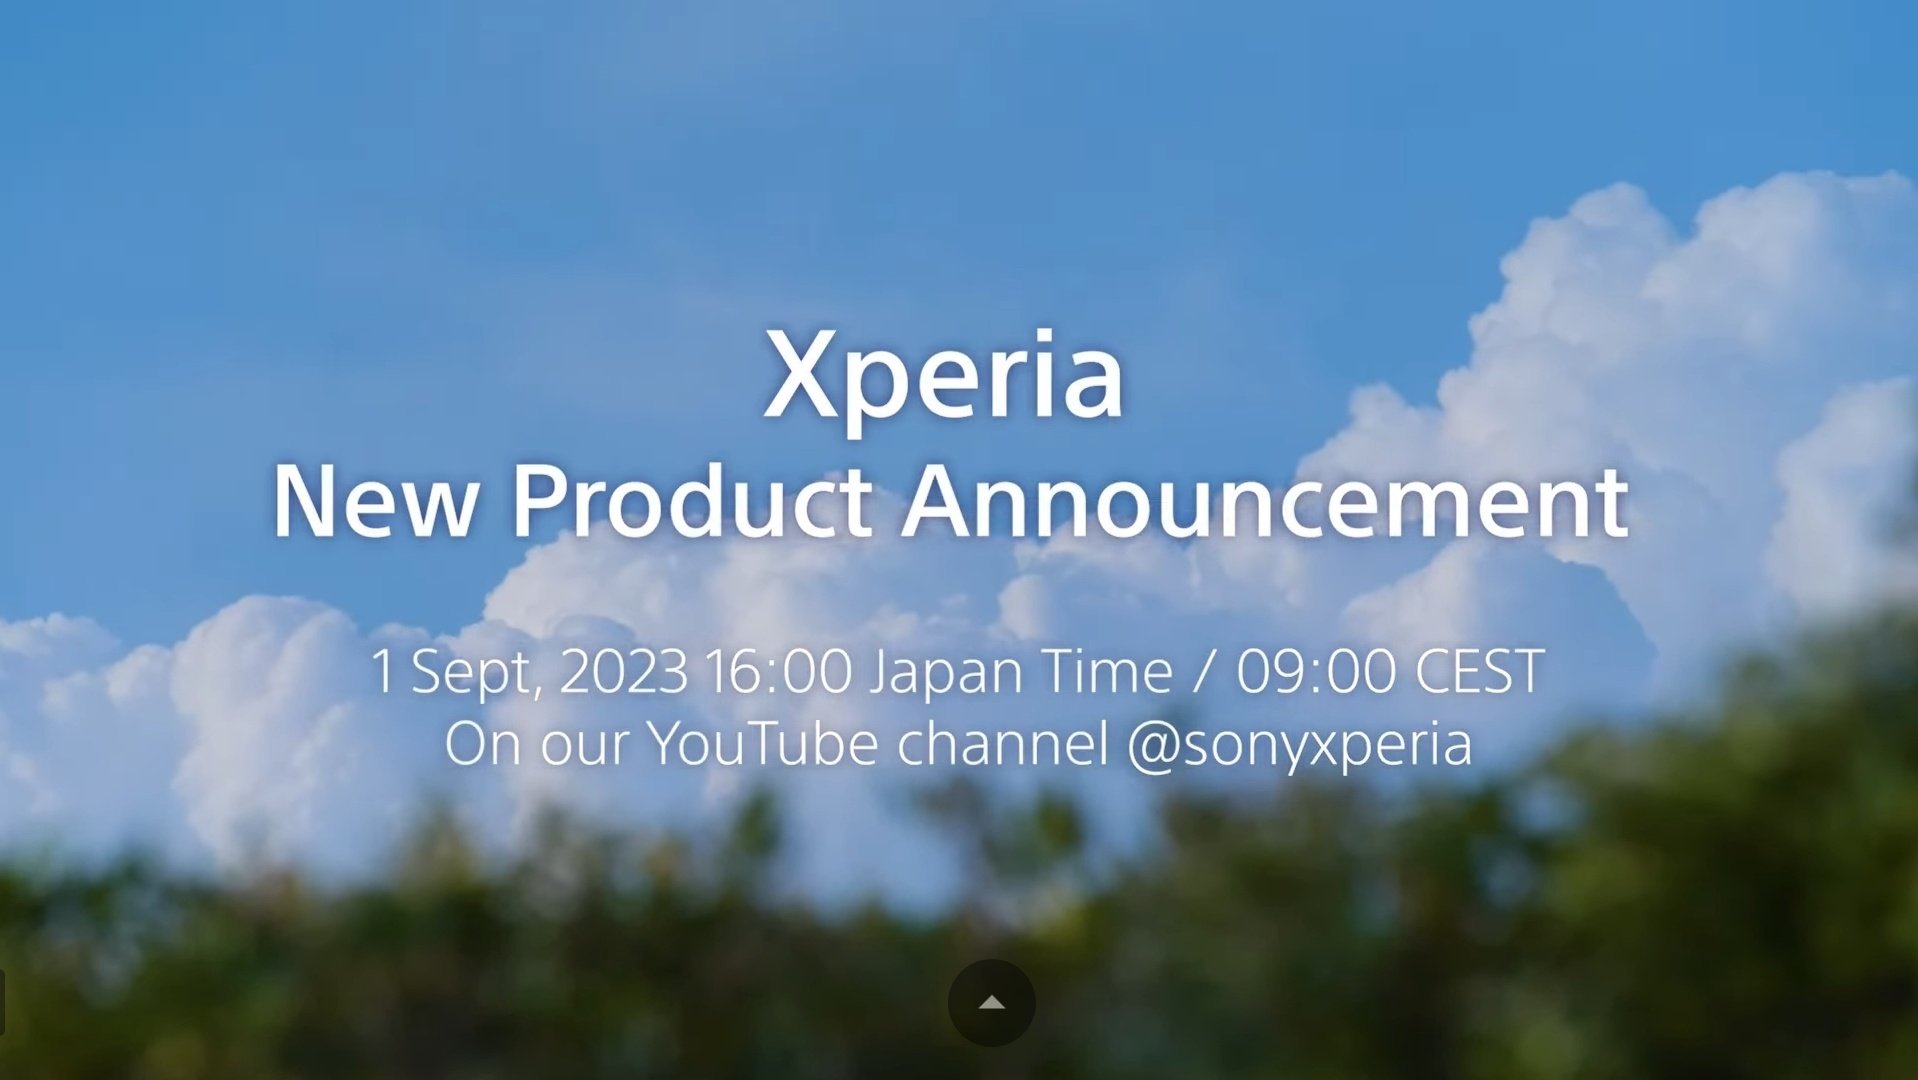 Sony Xperia 5 V announcement date 1 September, 2023.